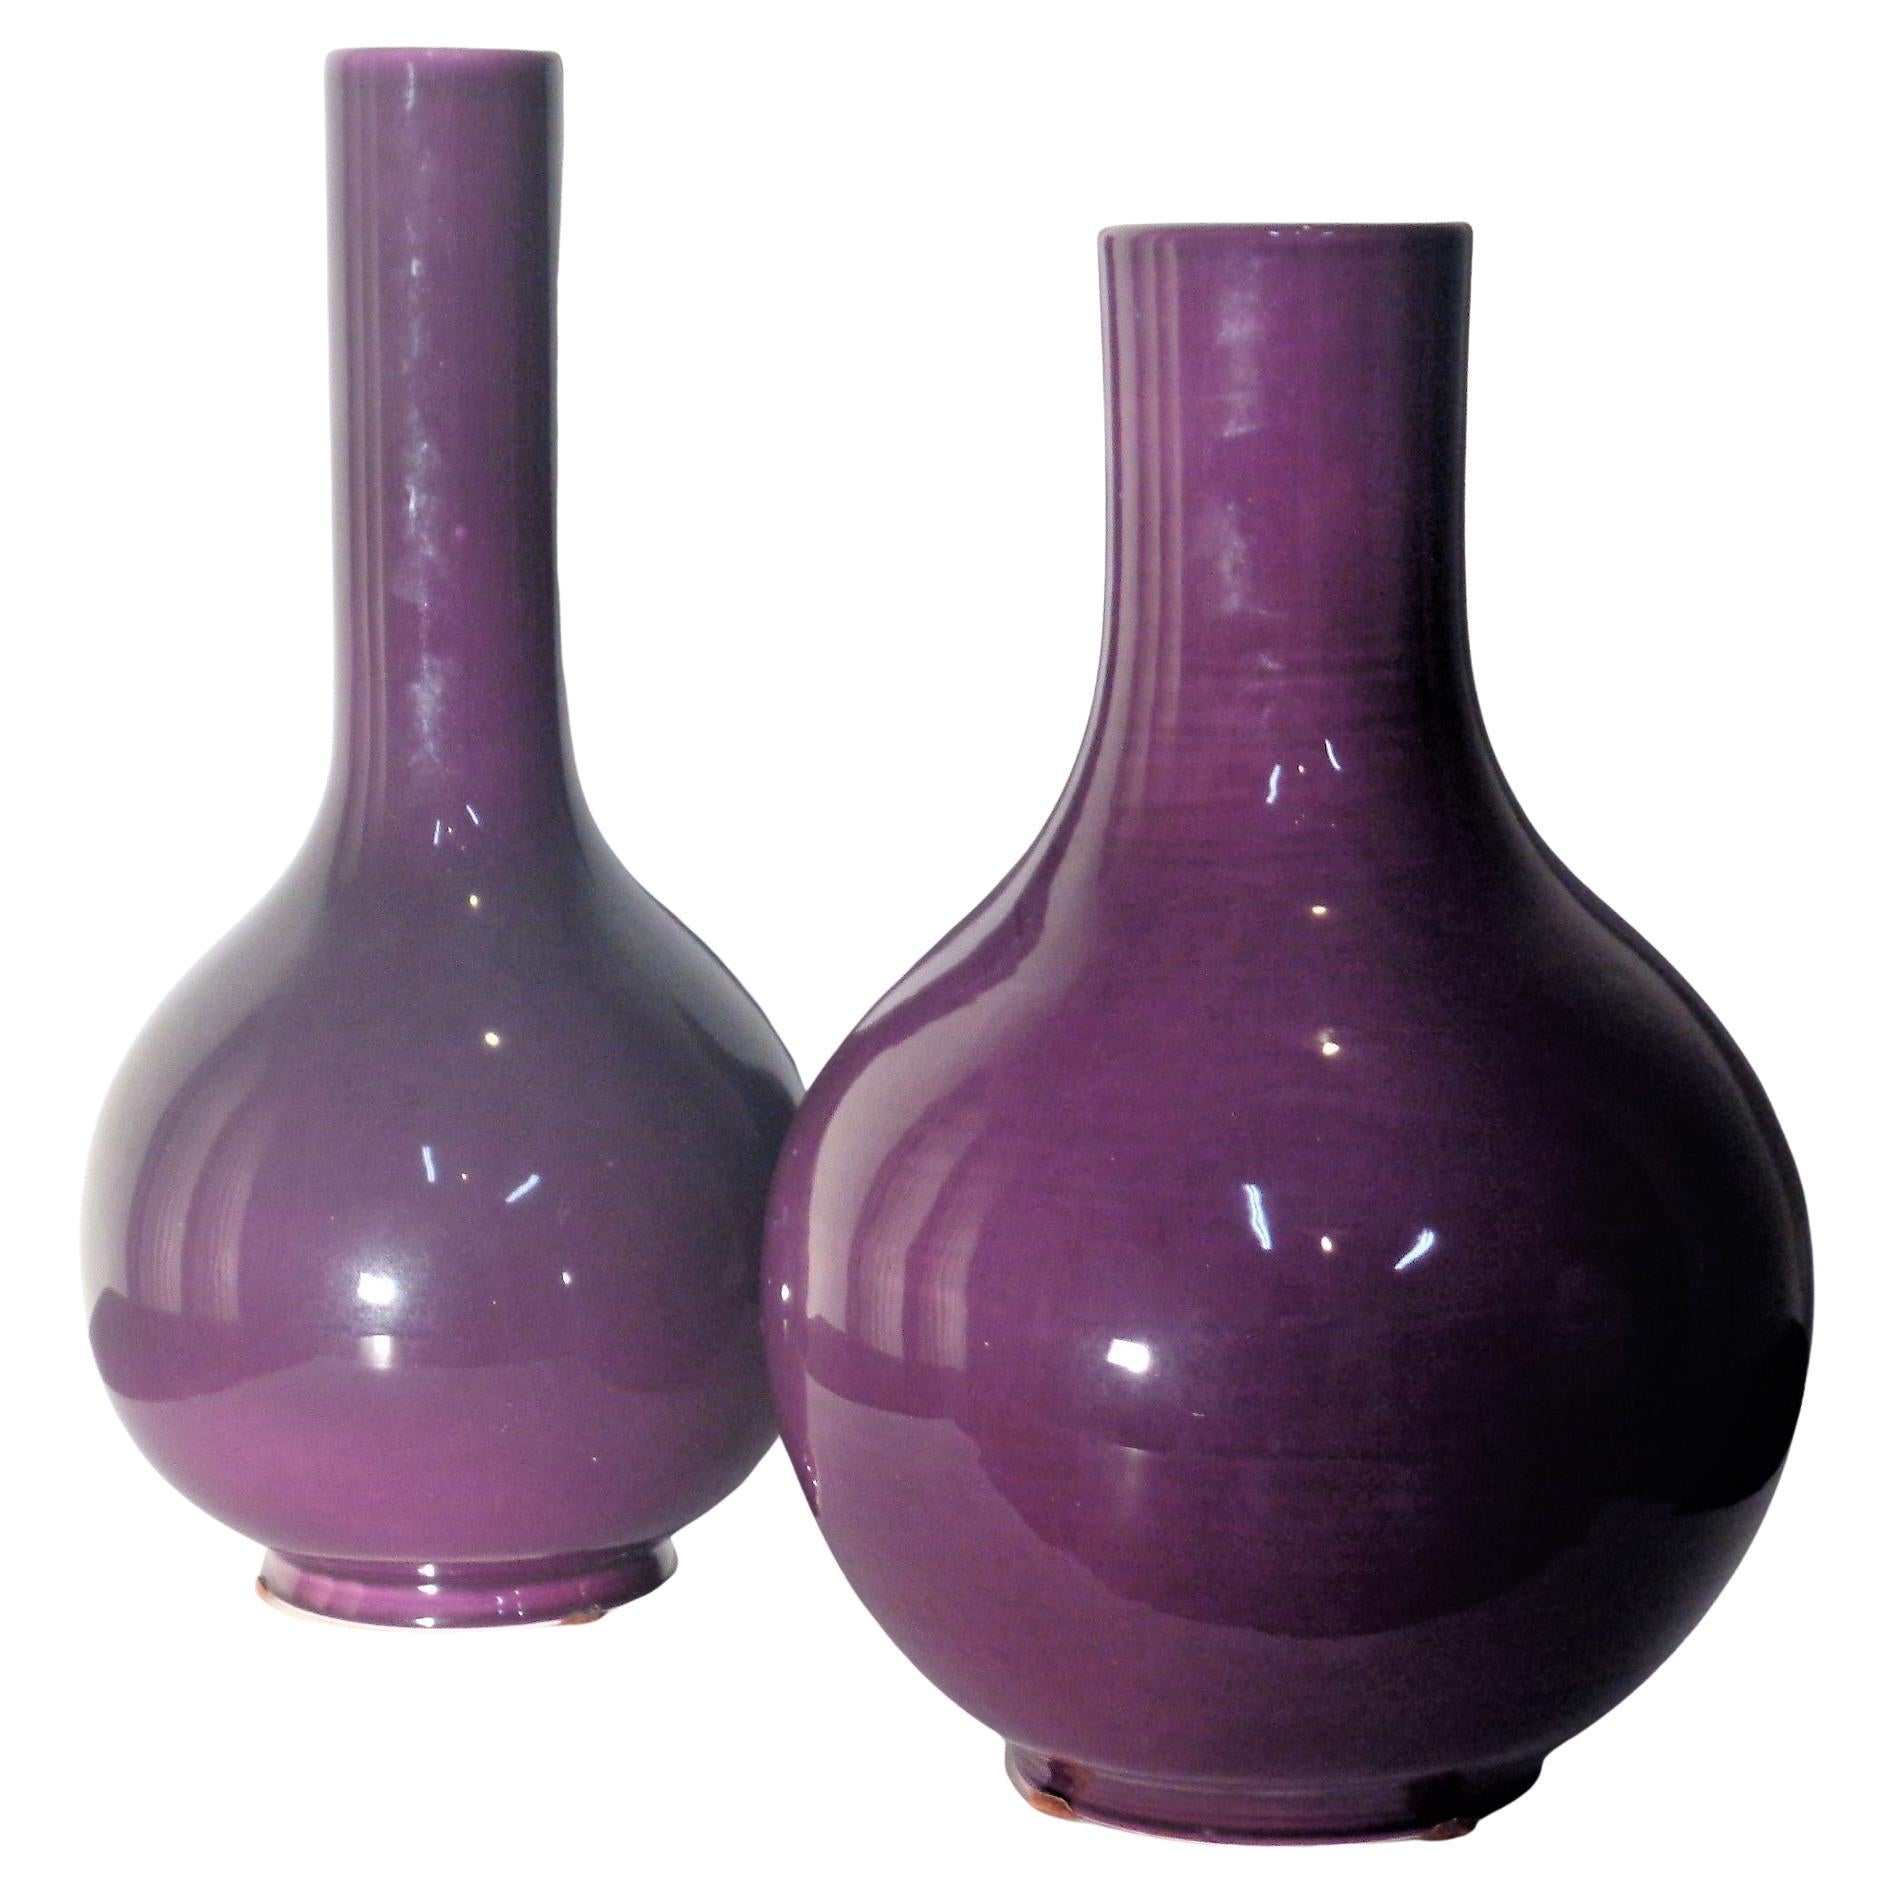 Two large high glazed plum purple porcelain vases in the classic Ming style with gold foil labels on underside - A Nora Fenton Import, Made in Italy. Great quality beautiful decorative items. Circa 1970's-1980's. Taller vase measures - 18 1/2